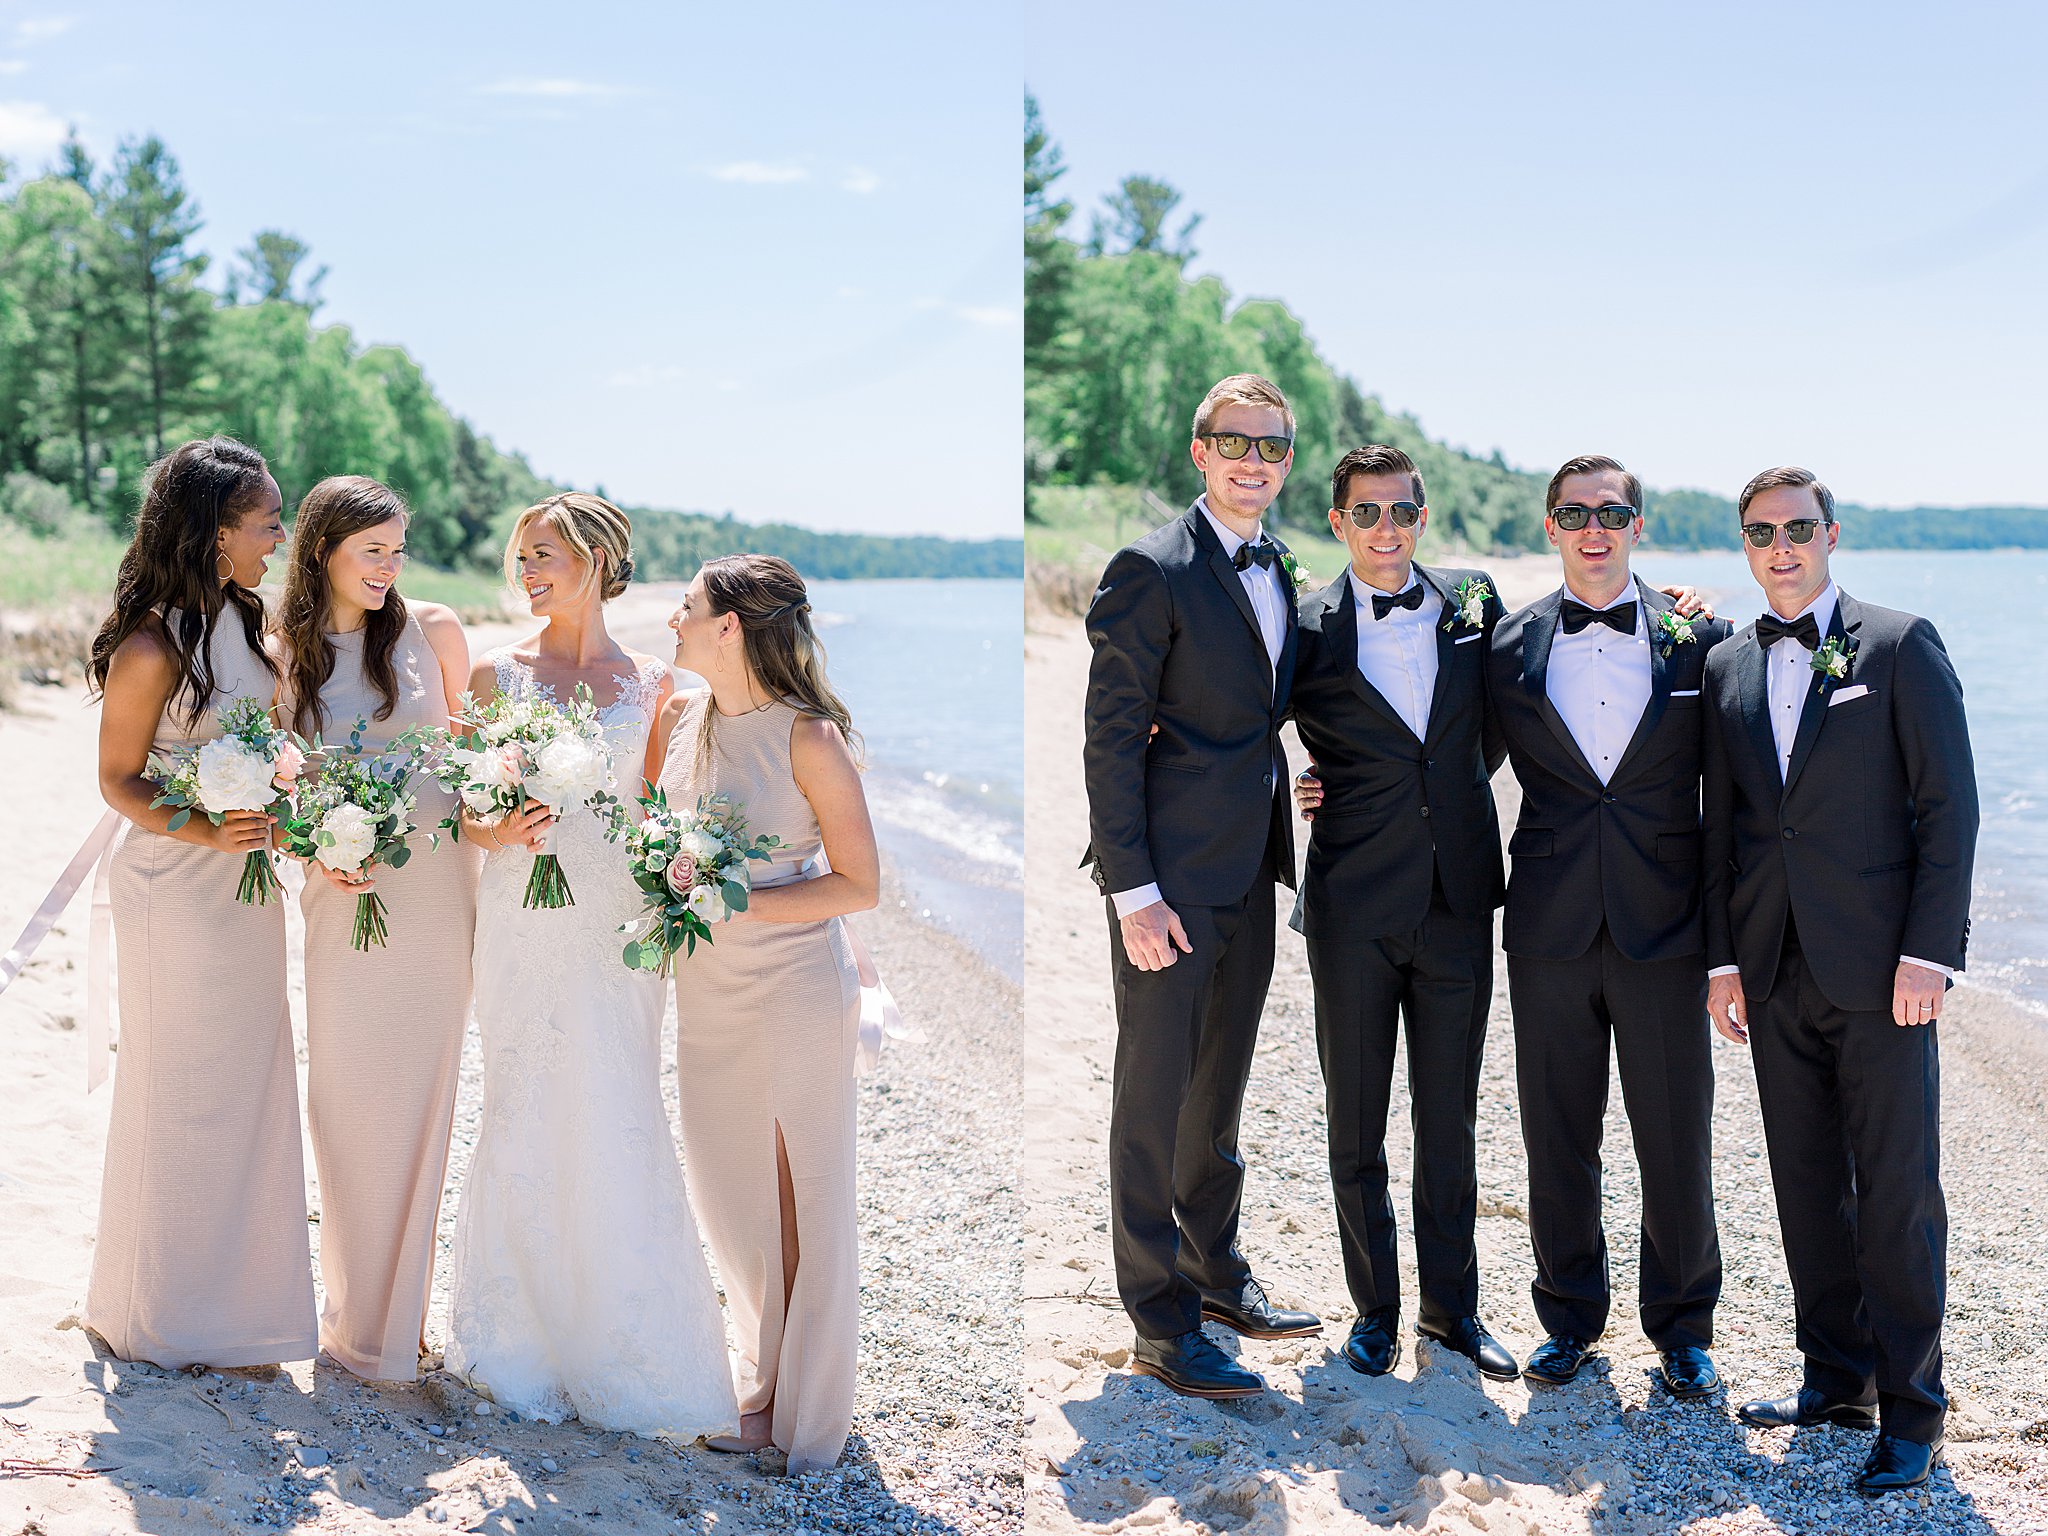 Bridal Party pictures during intimate Lake Michigan wedding.